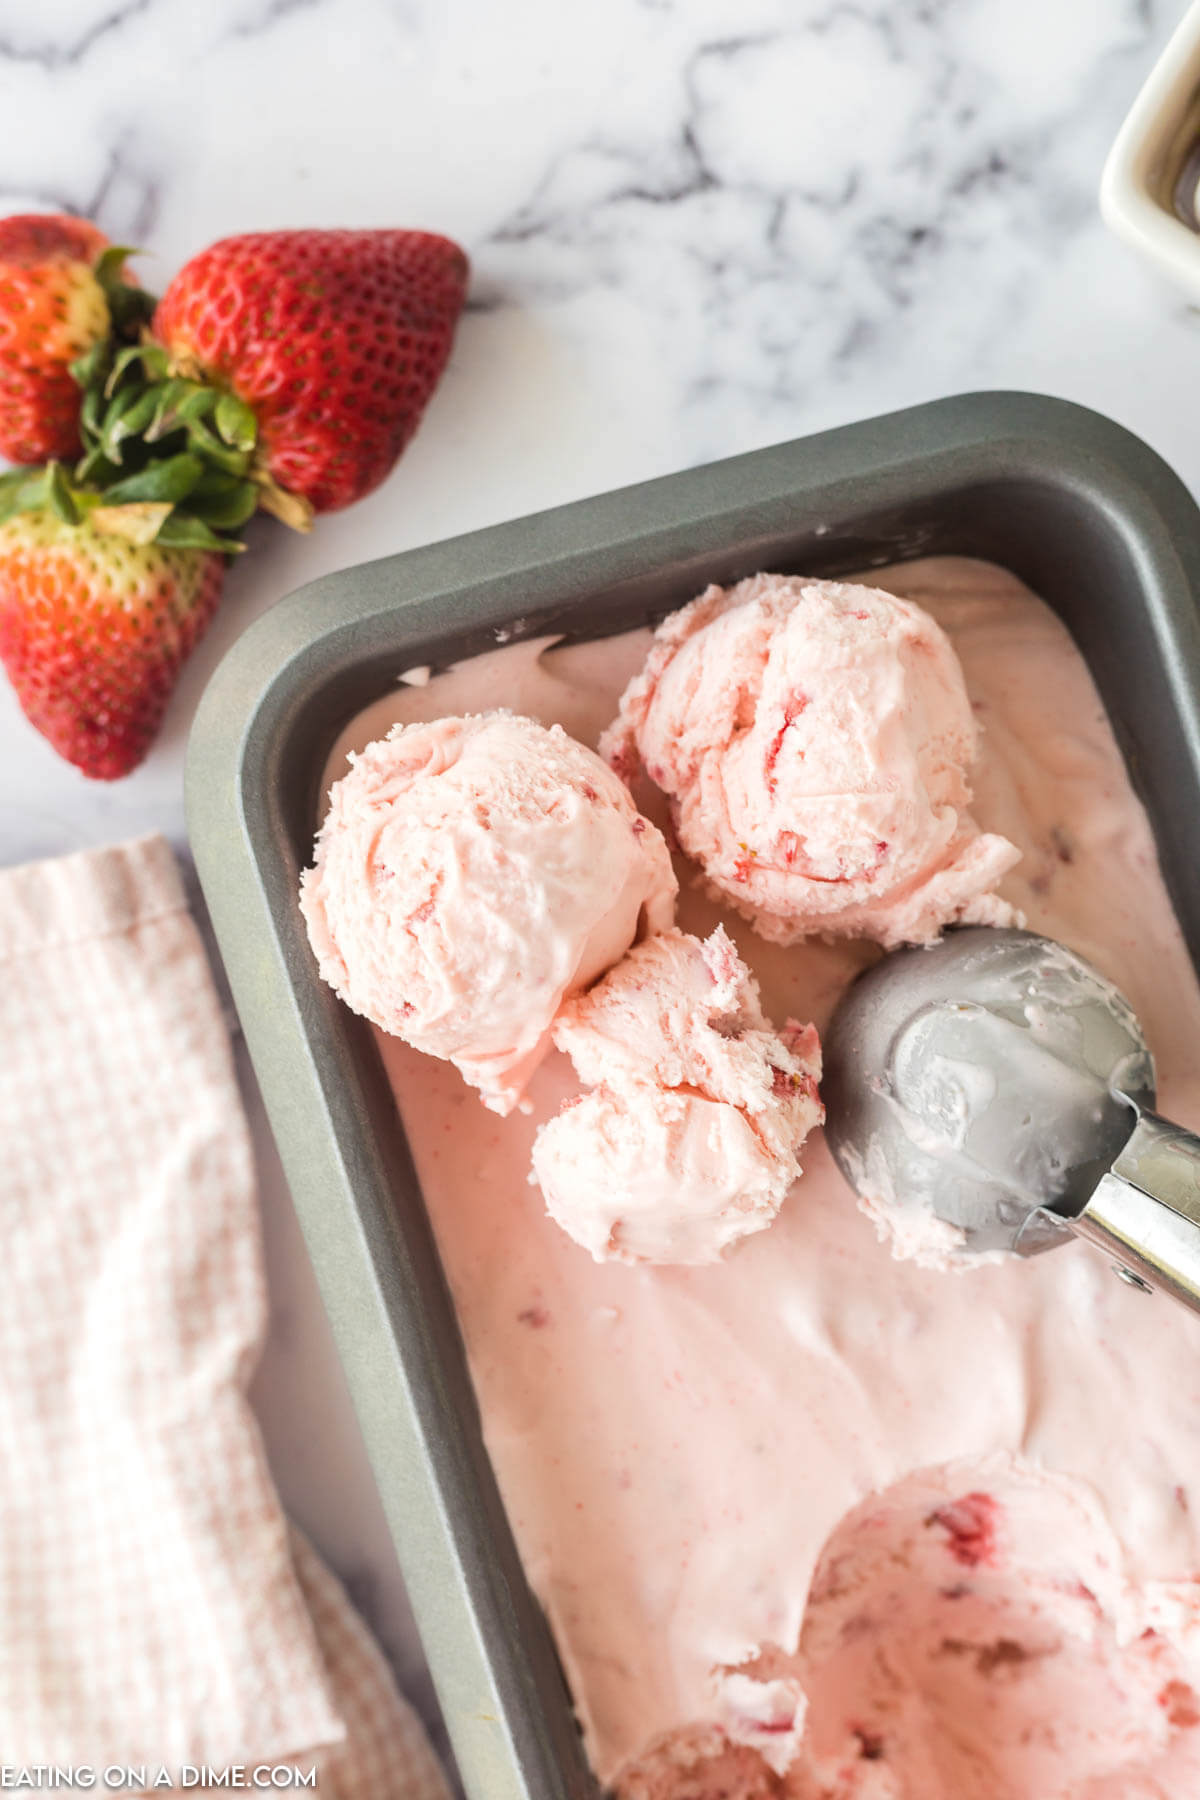 Strawberry ice cream in a loaf pan